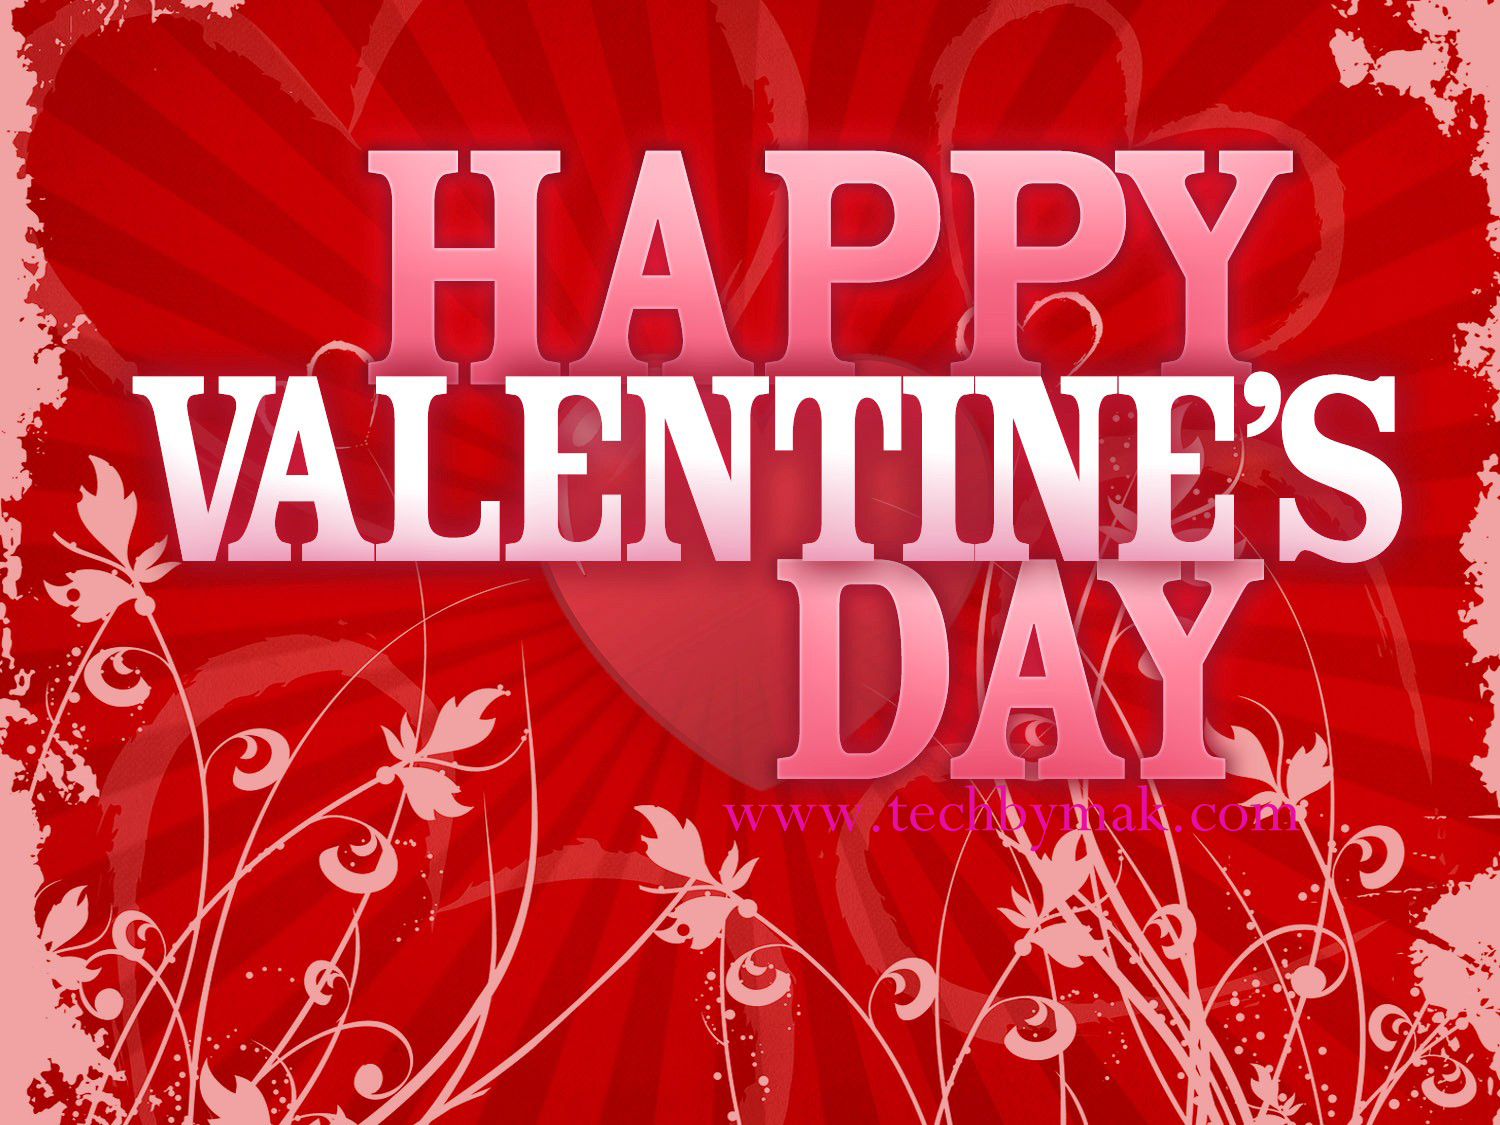 Happy Valentines day Pictures,photos and wallpapers 20161500 x 1125